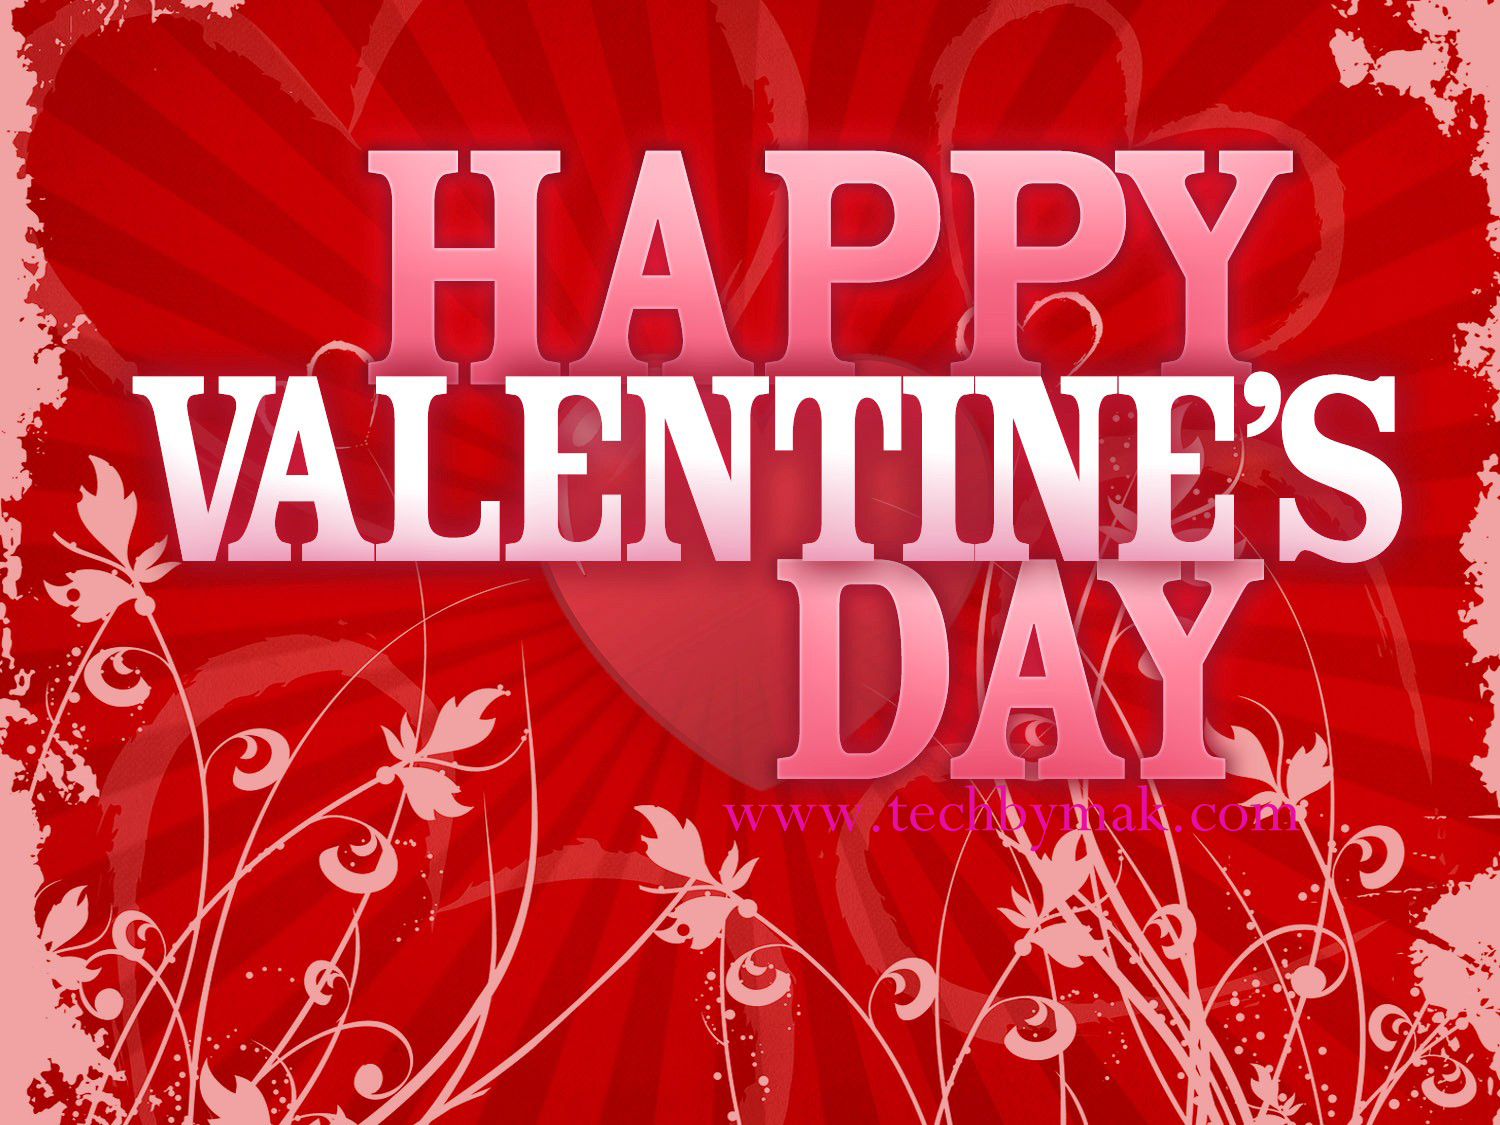 Happy Valentines day Pictures,photos and wallpapers 20161500 x 1125